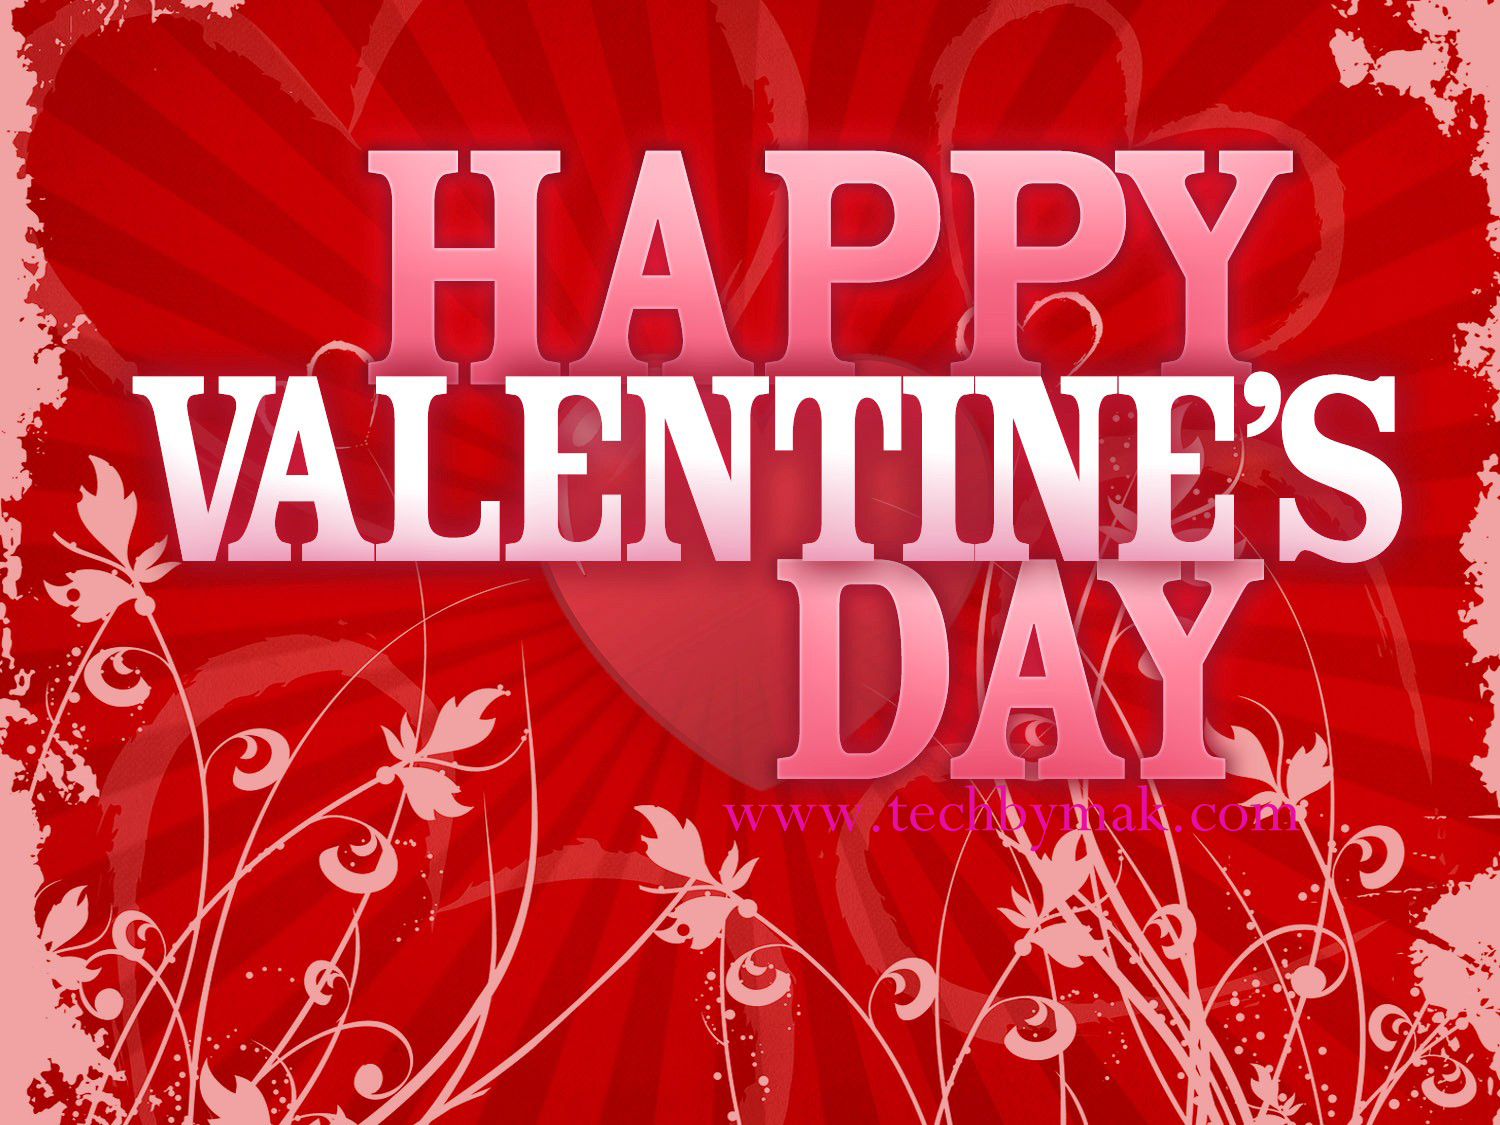 Happy Valentines day Pictures,photos and wallpapers 20161500 x 1125